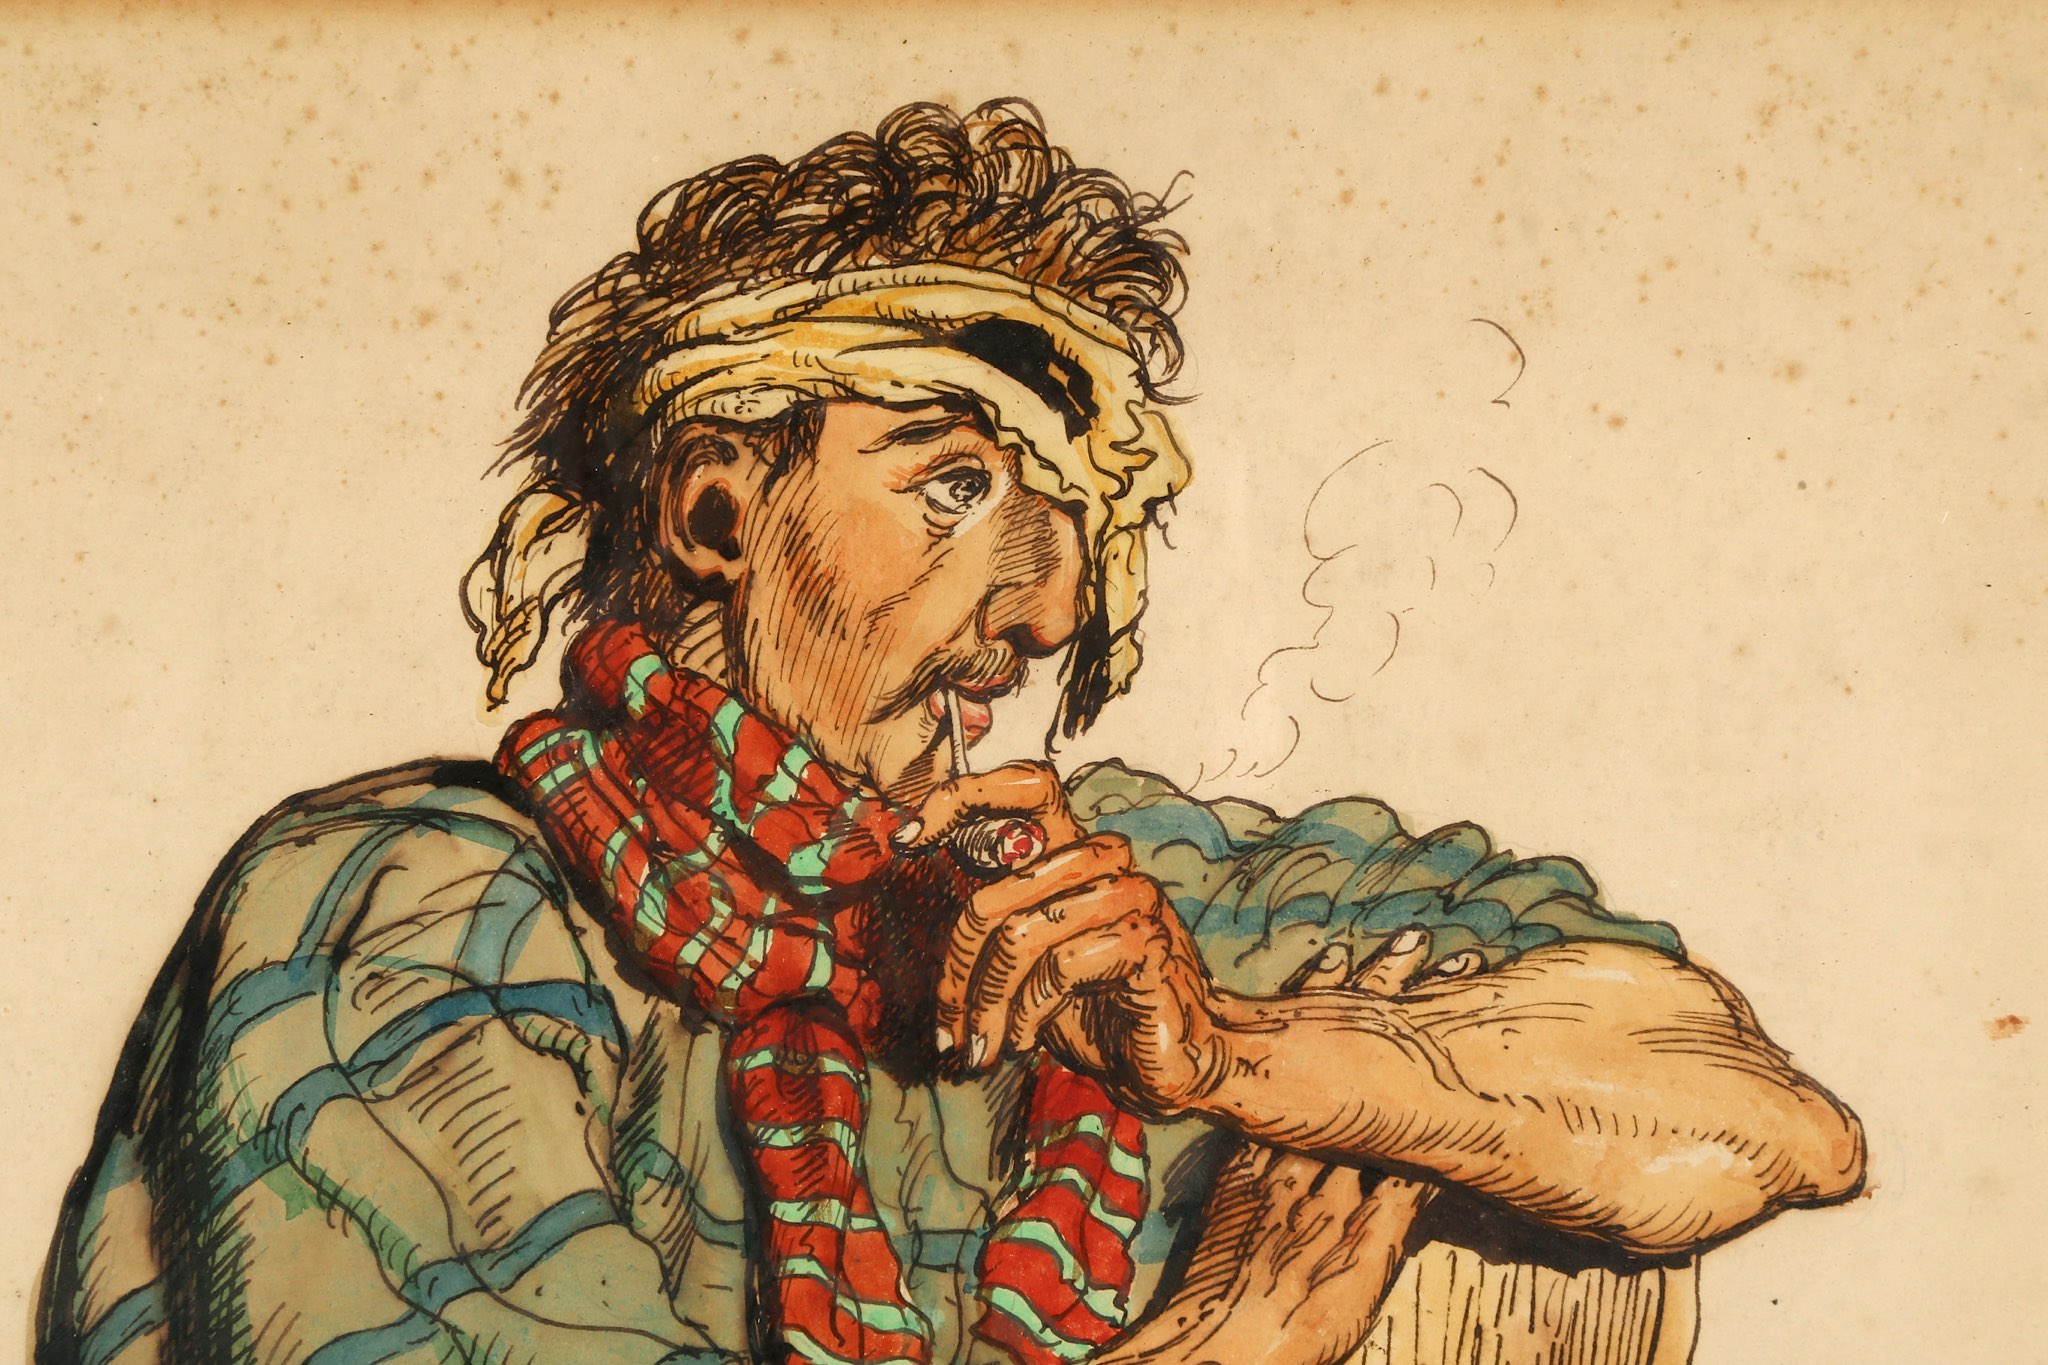 Attributed to Ernest Henry Griset (French; 1844-1907), 'The Pipe Smoker'. Watercolour, pen and ink - Image 2 of 4